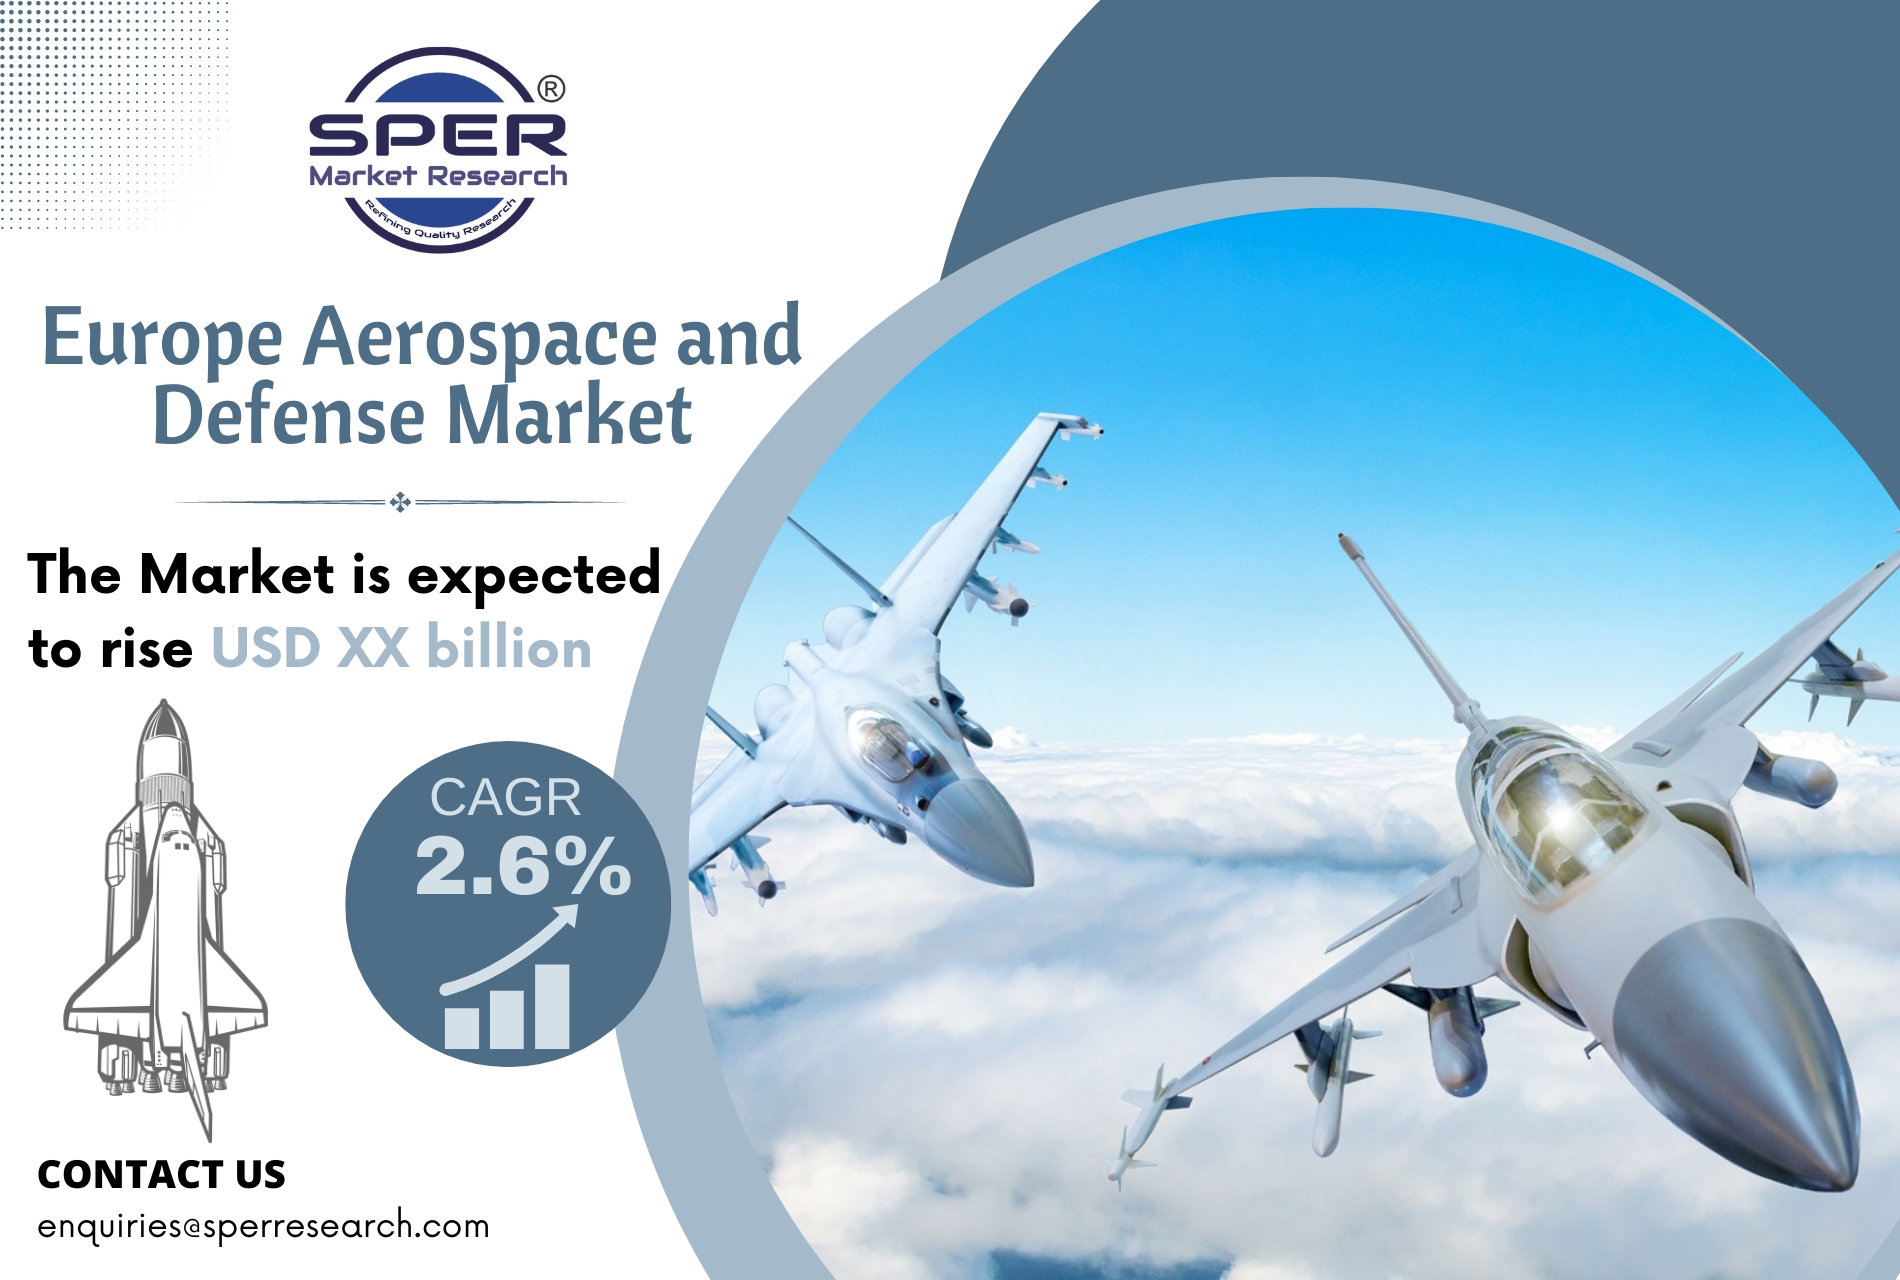 Europe Aerospace and Defense Market Growth, Share, Trends, Future Scope 2033